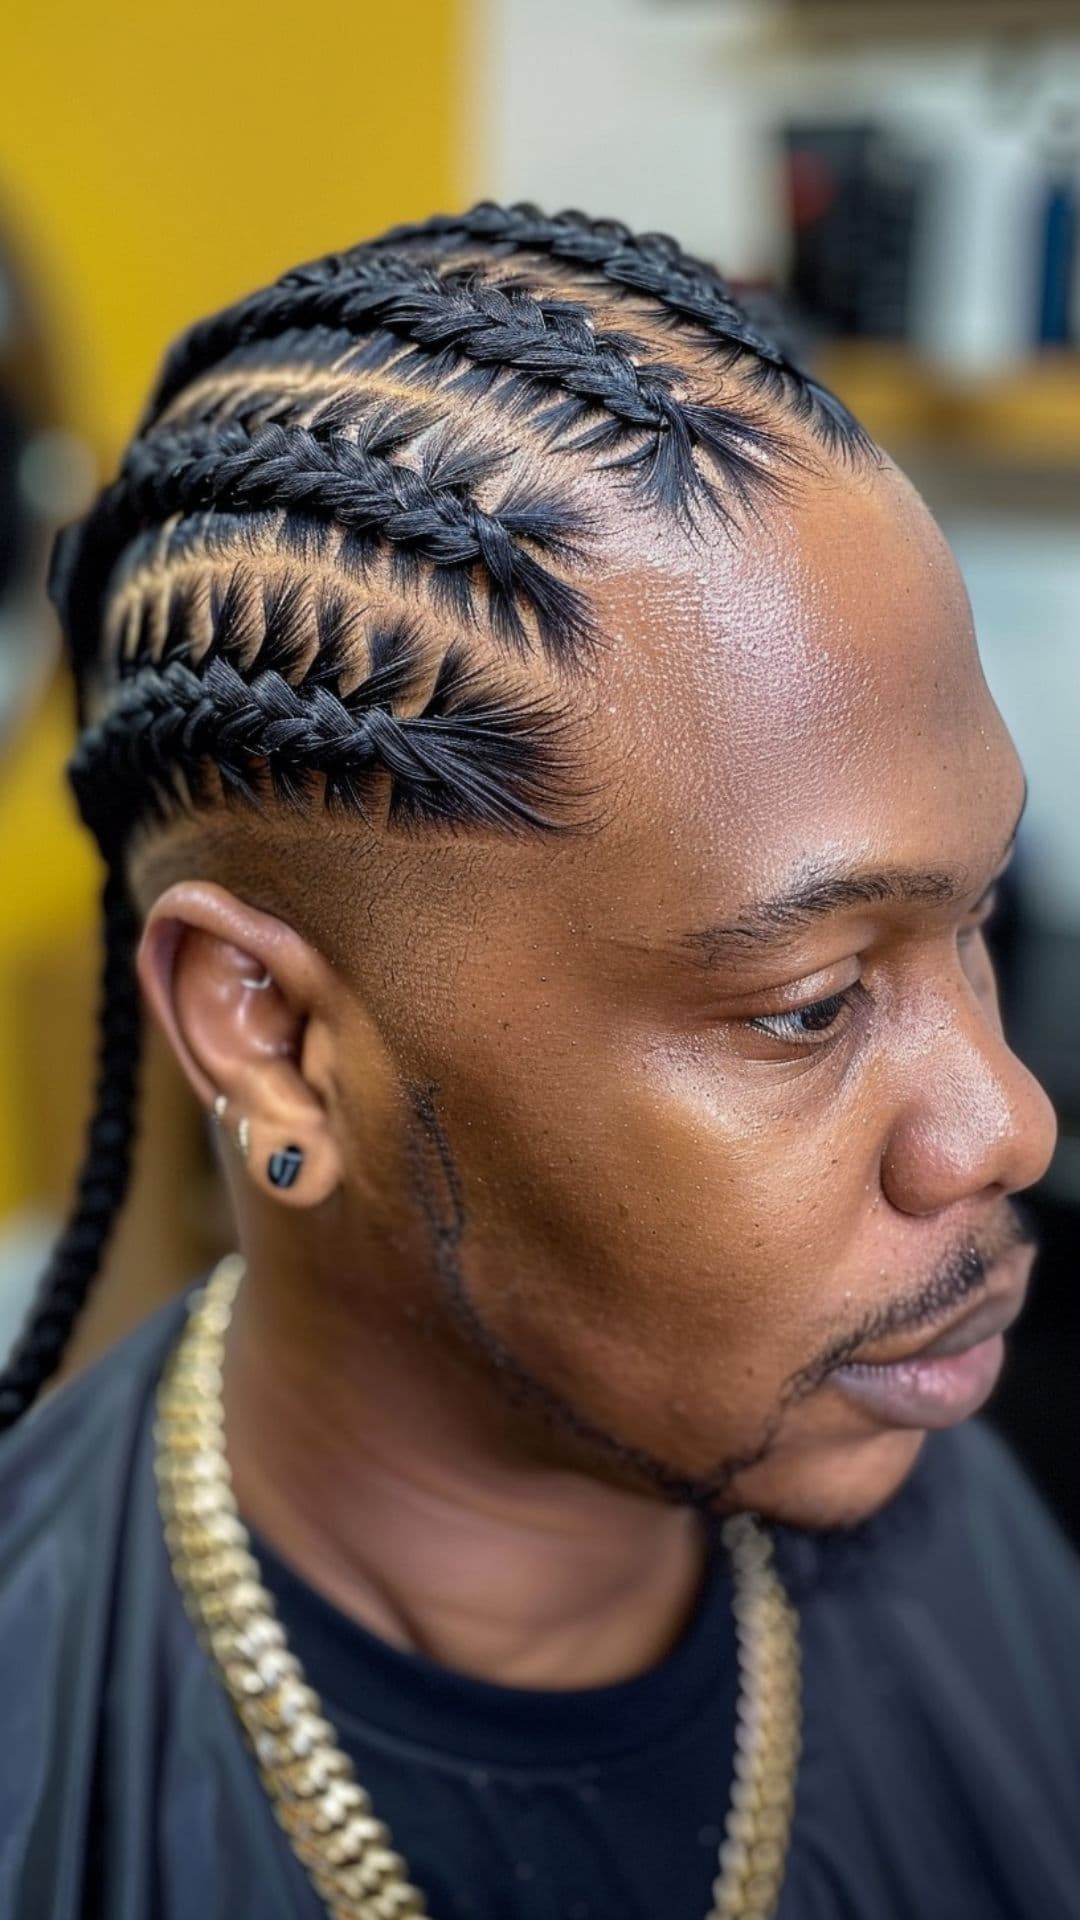 A black man modelling cornrows hairstyle.